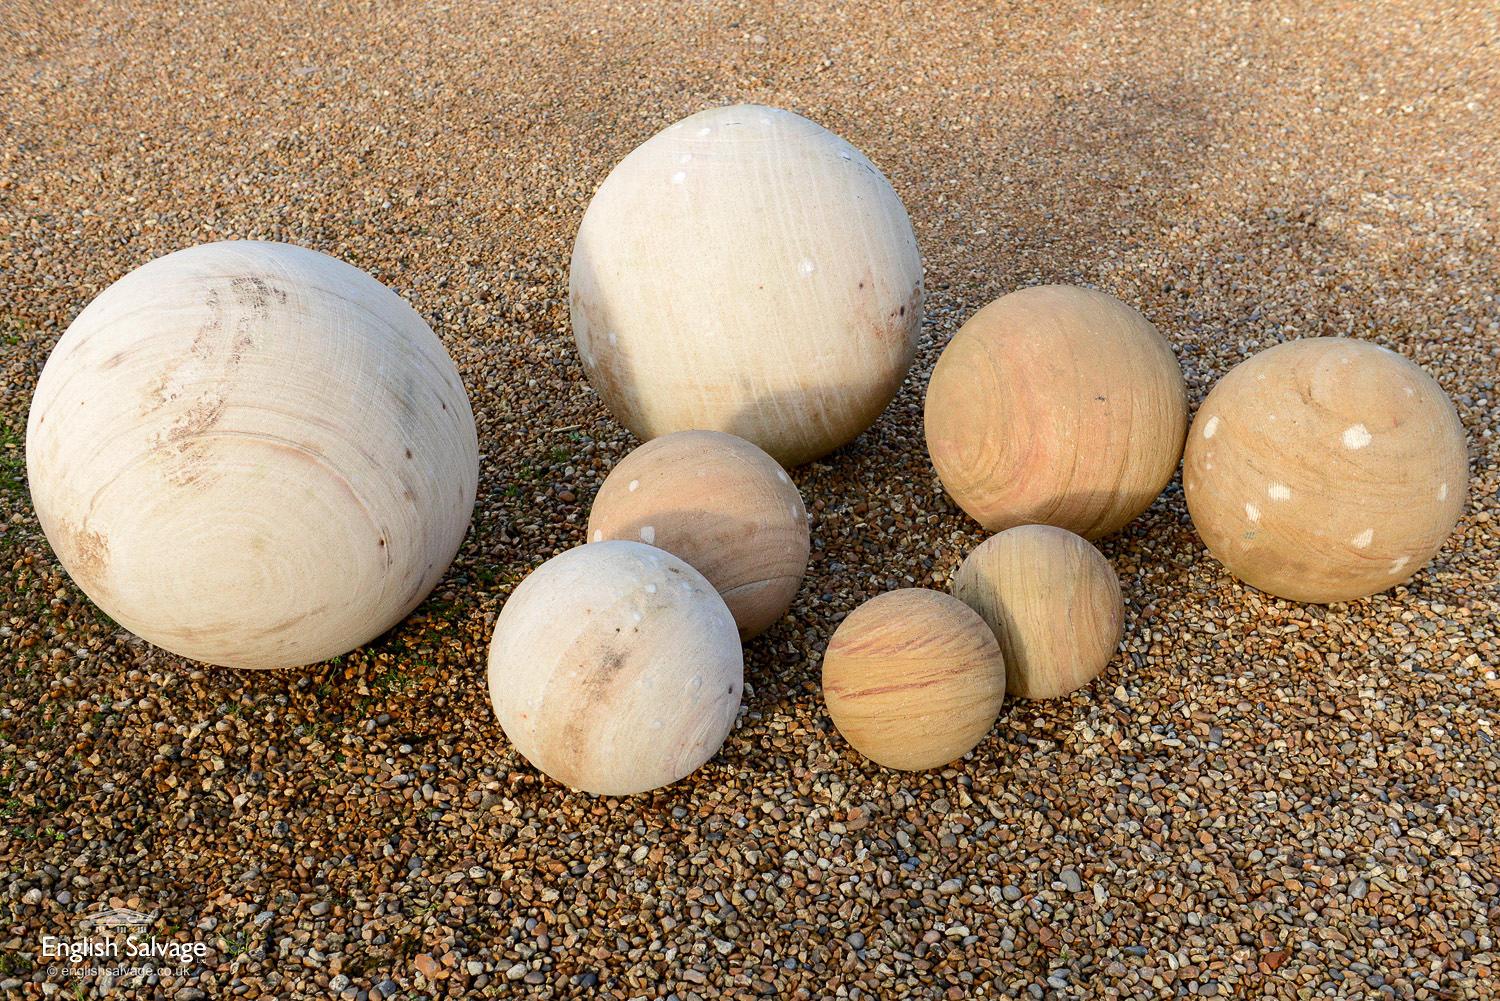 Attractive sandstone balls / spheres in two colors and varying sizes. We have received a new delivery which is due to be added here. The natural variations and markings of the stone mean that each ball is unique. They would look striking alone or in